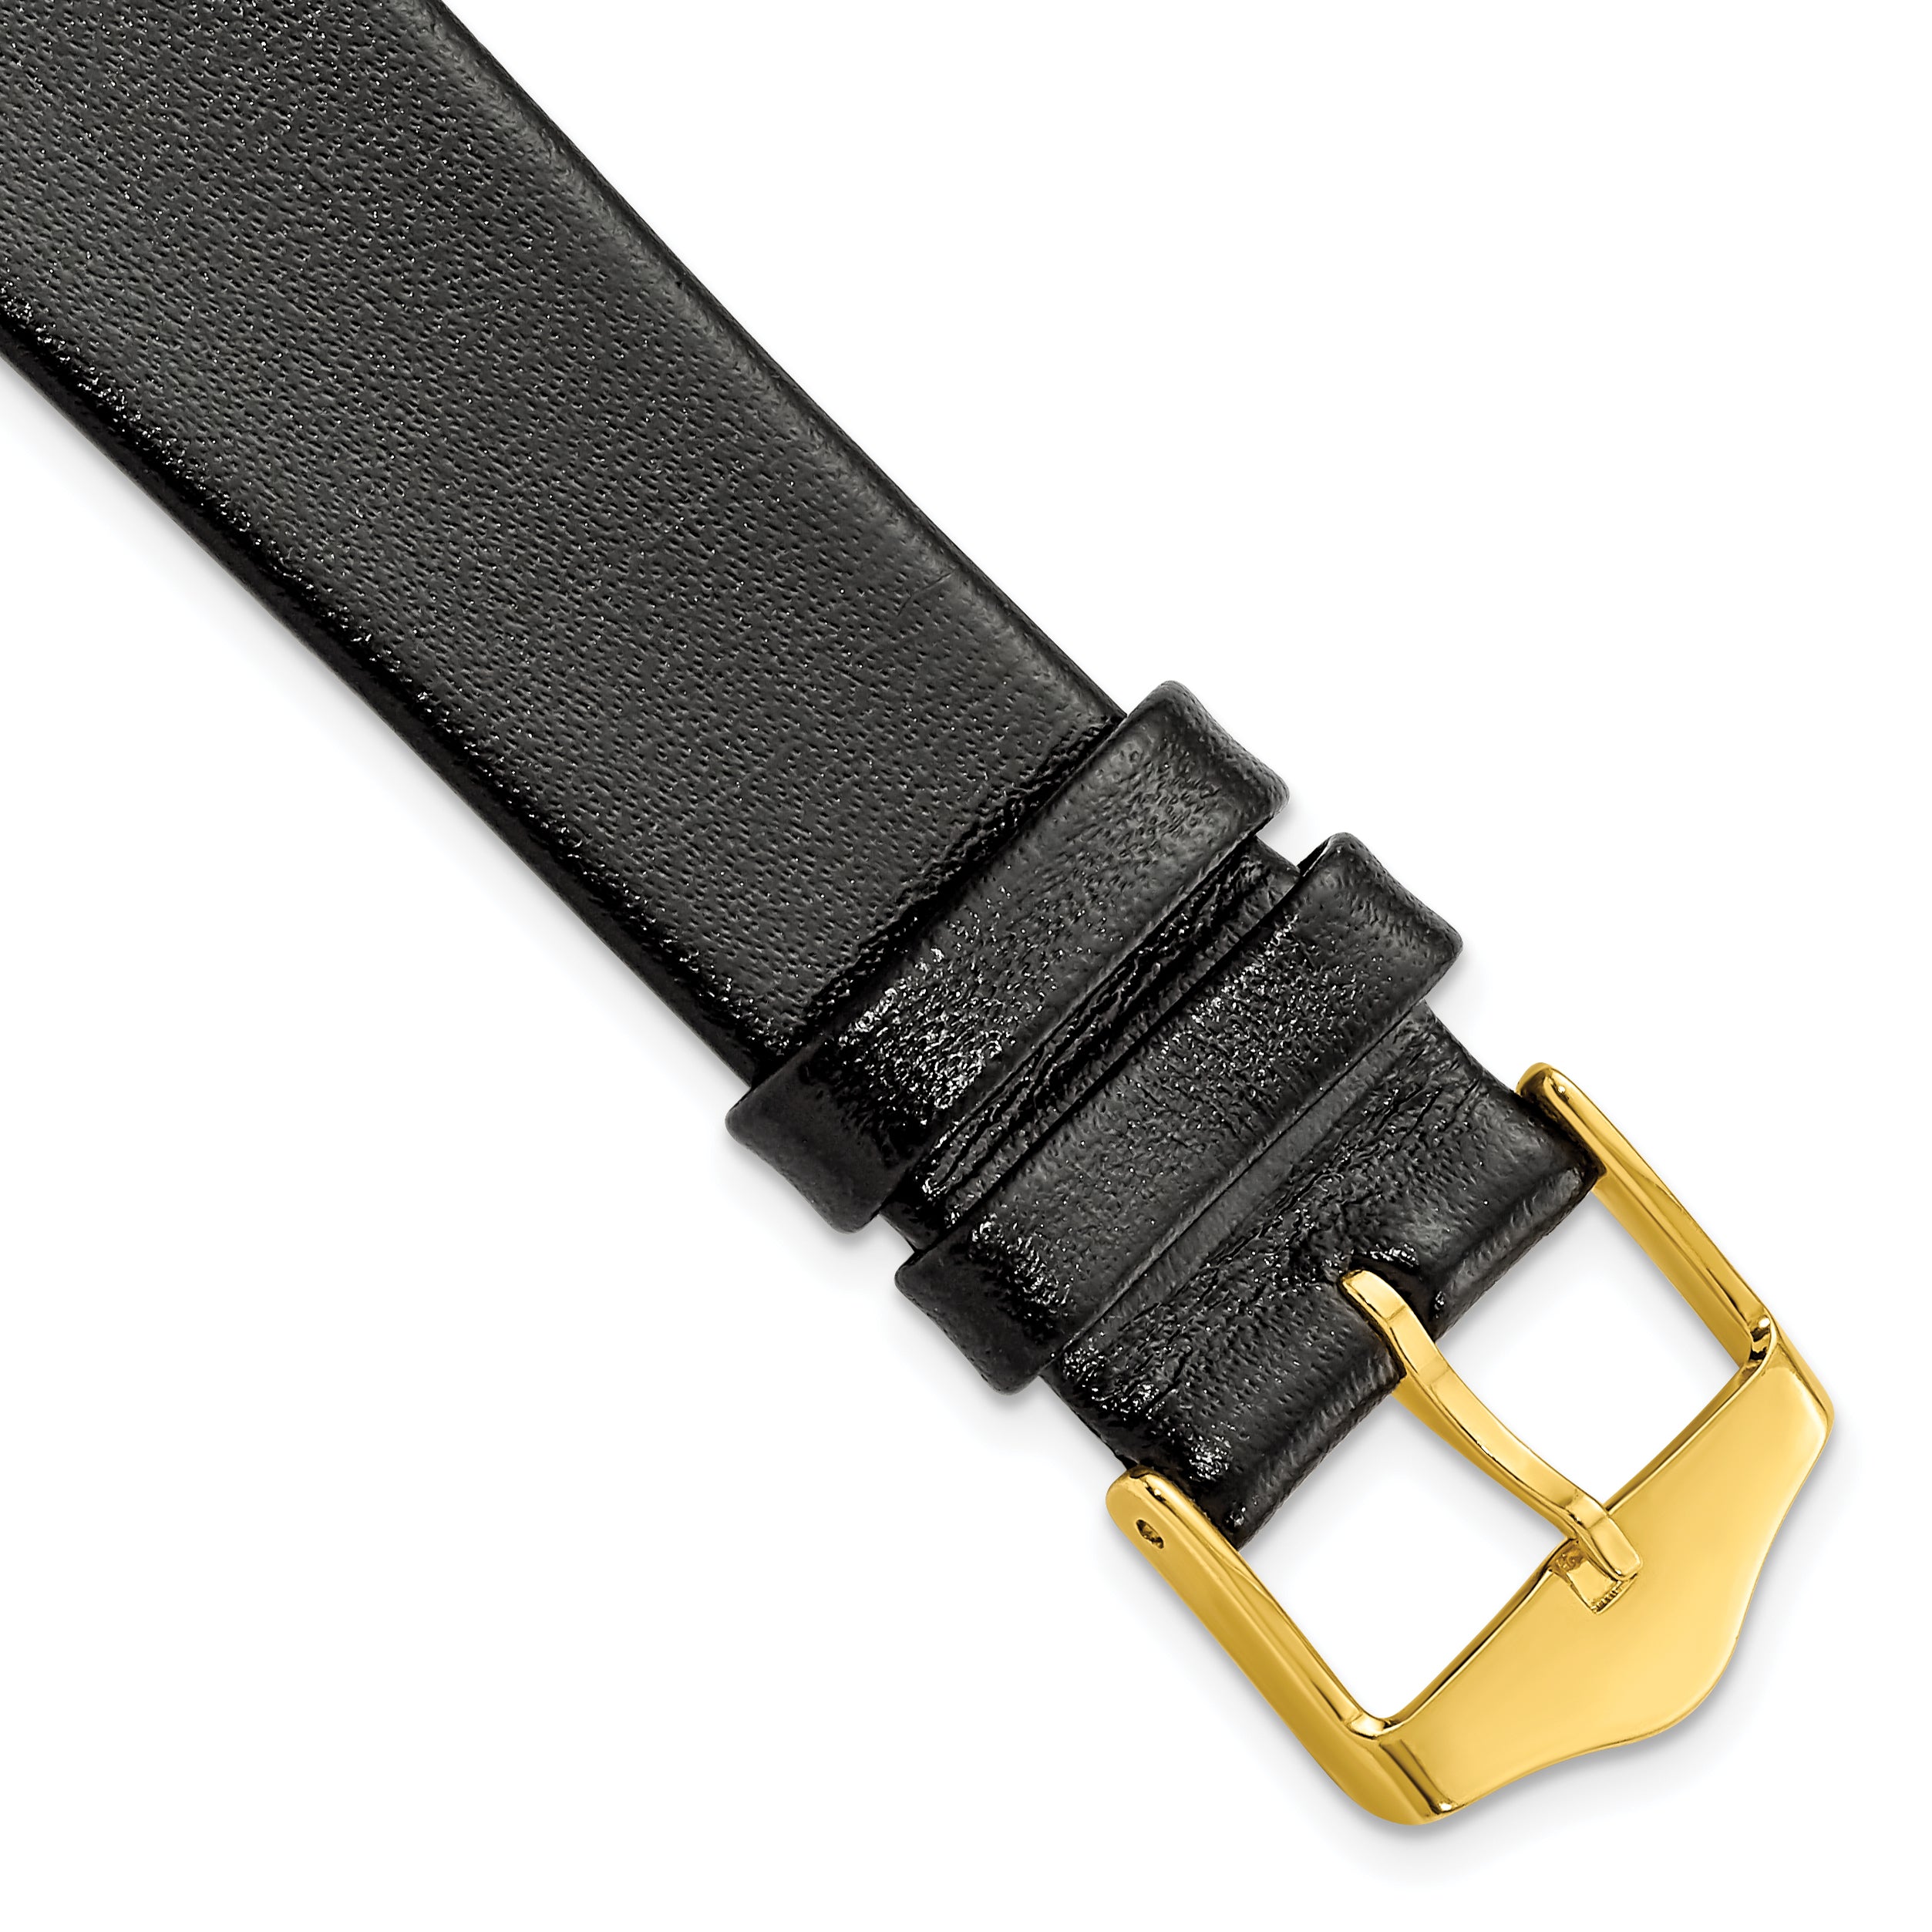 DeBeer 19mm Black Long Smooth Flat Leather with Gold-tone Buckle 8.5 inch Watch Band